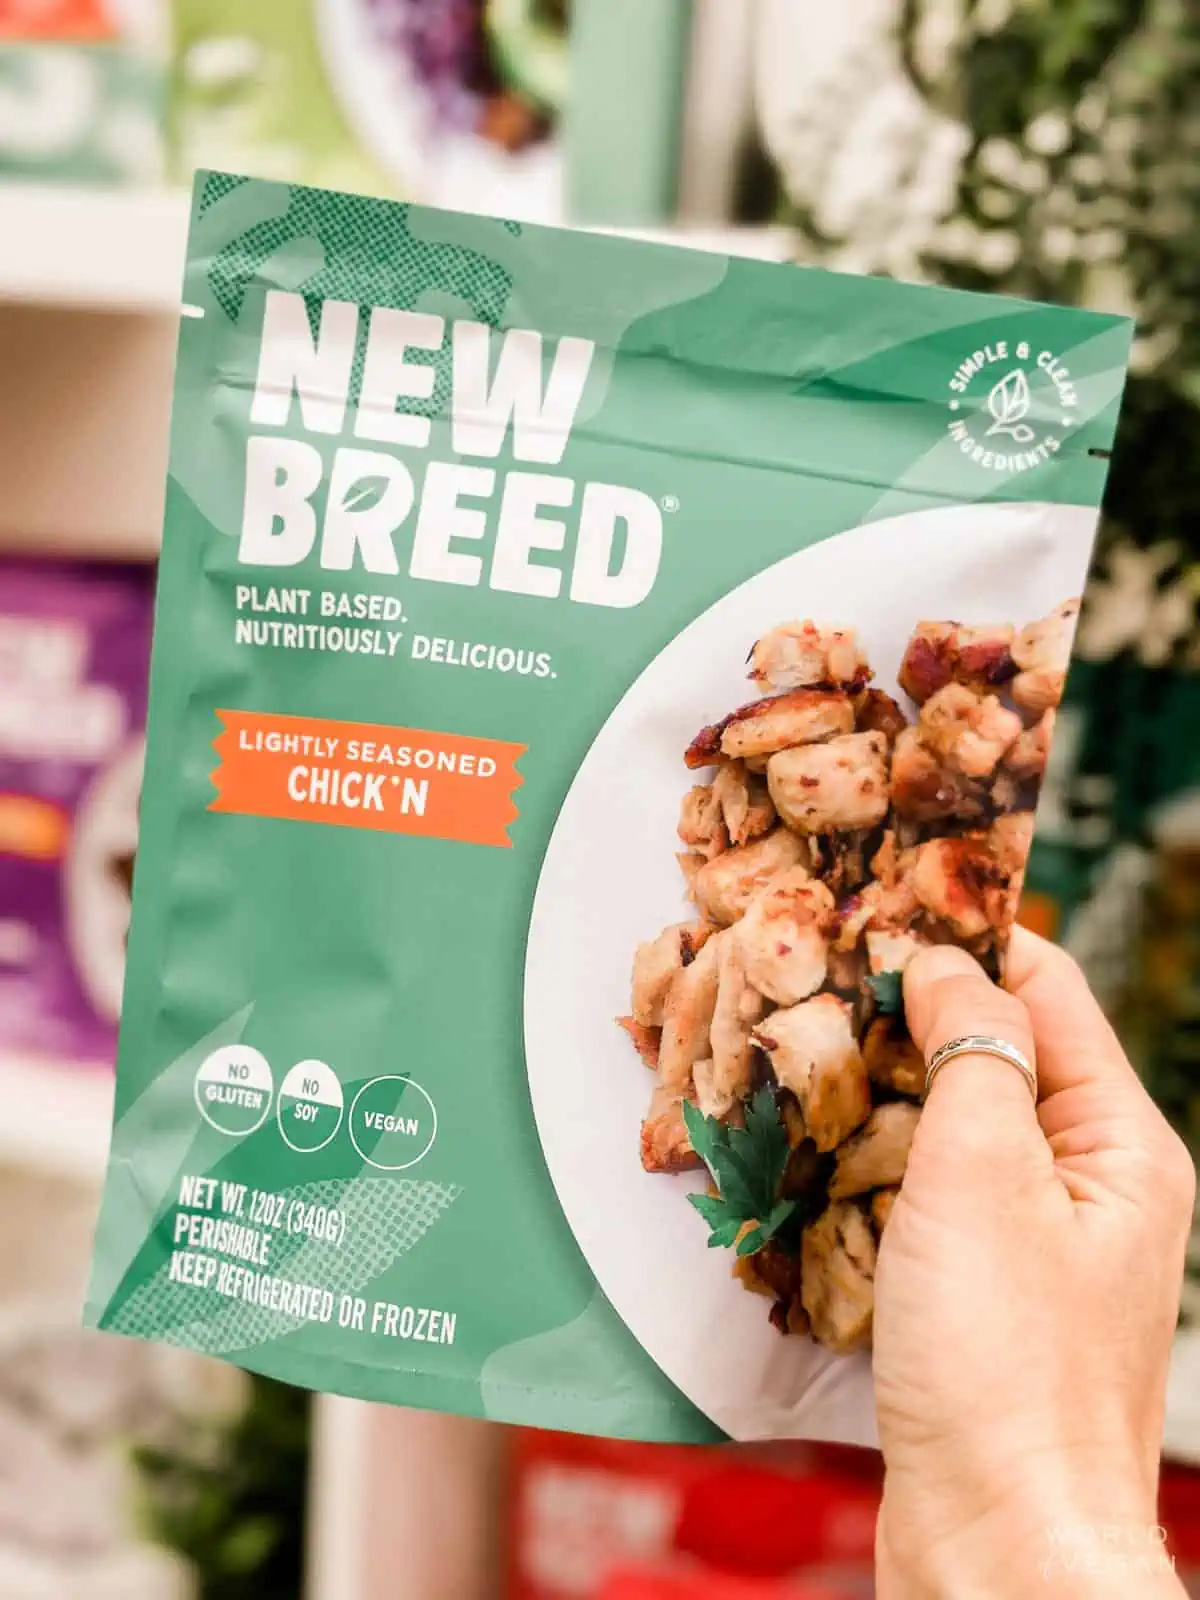 A package of New Breed plant-based chicken.